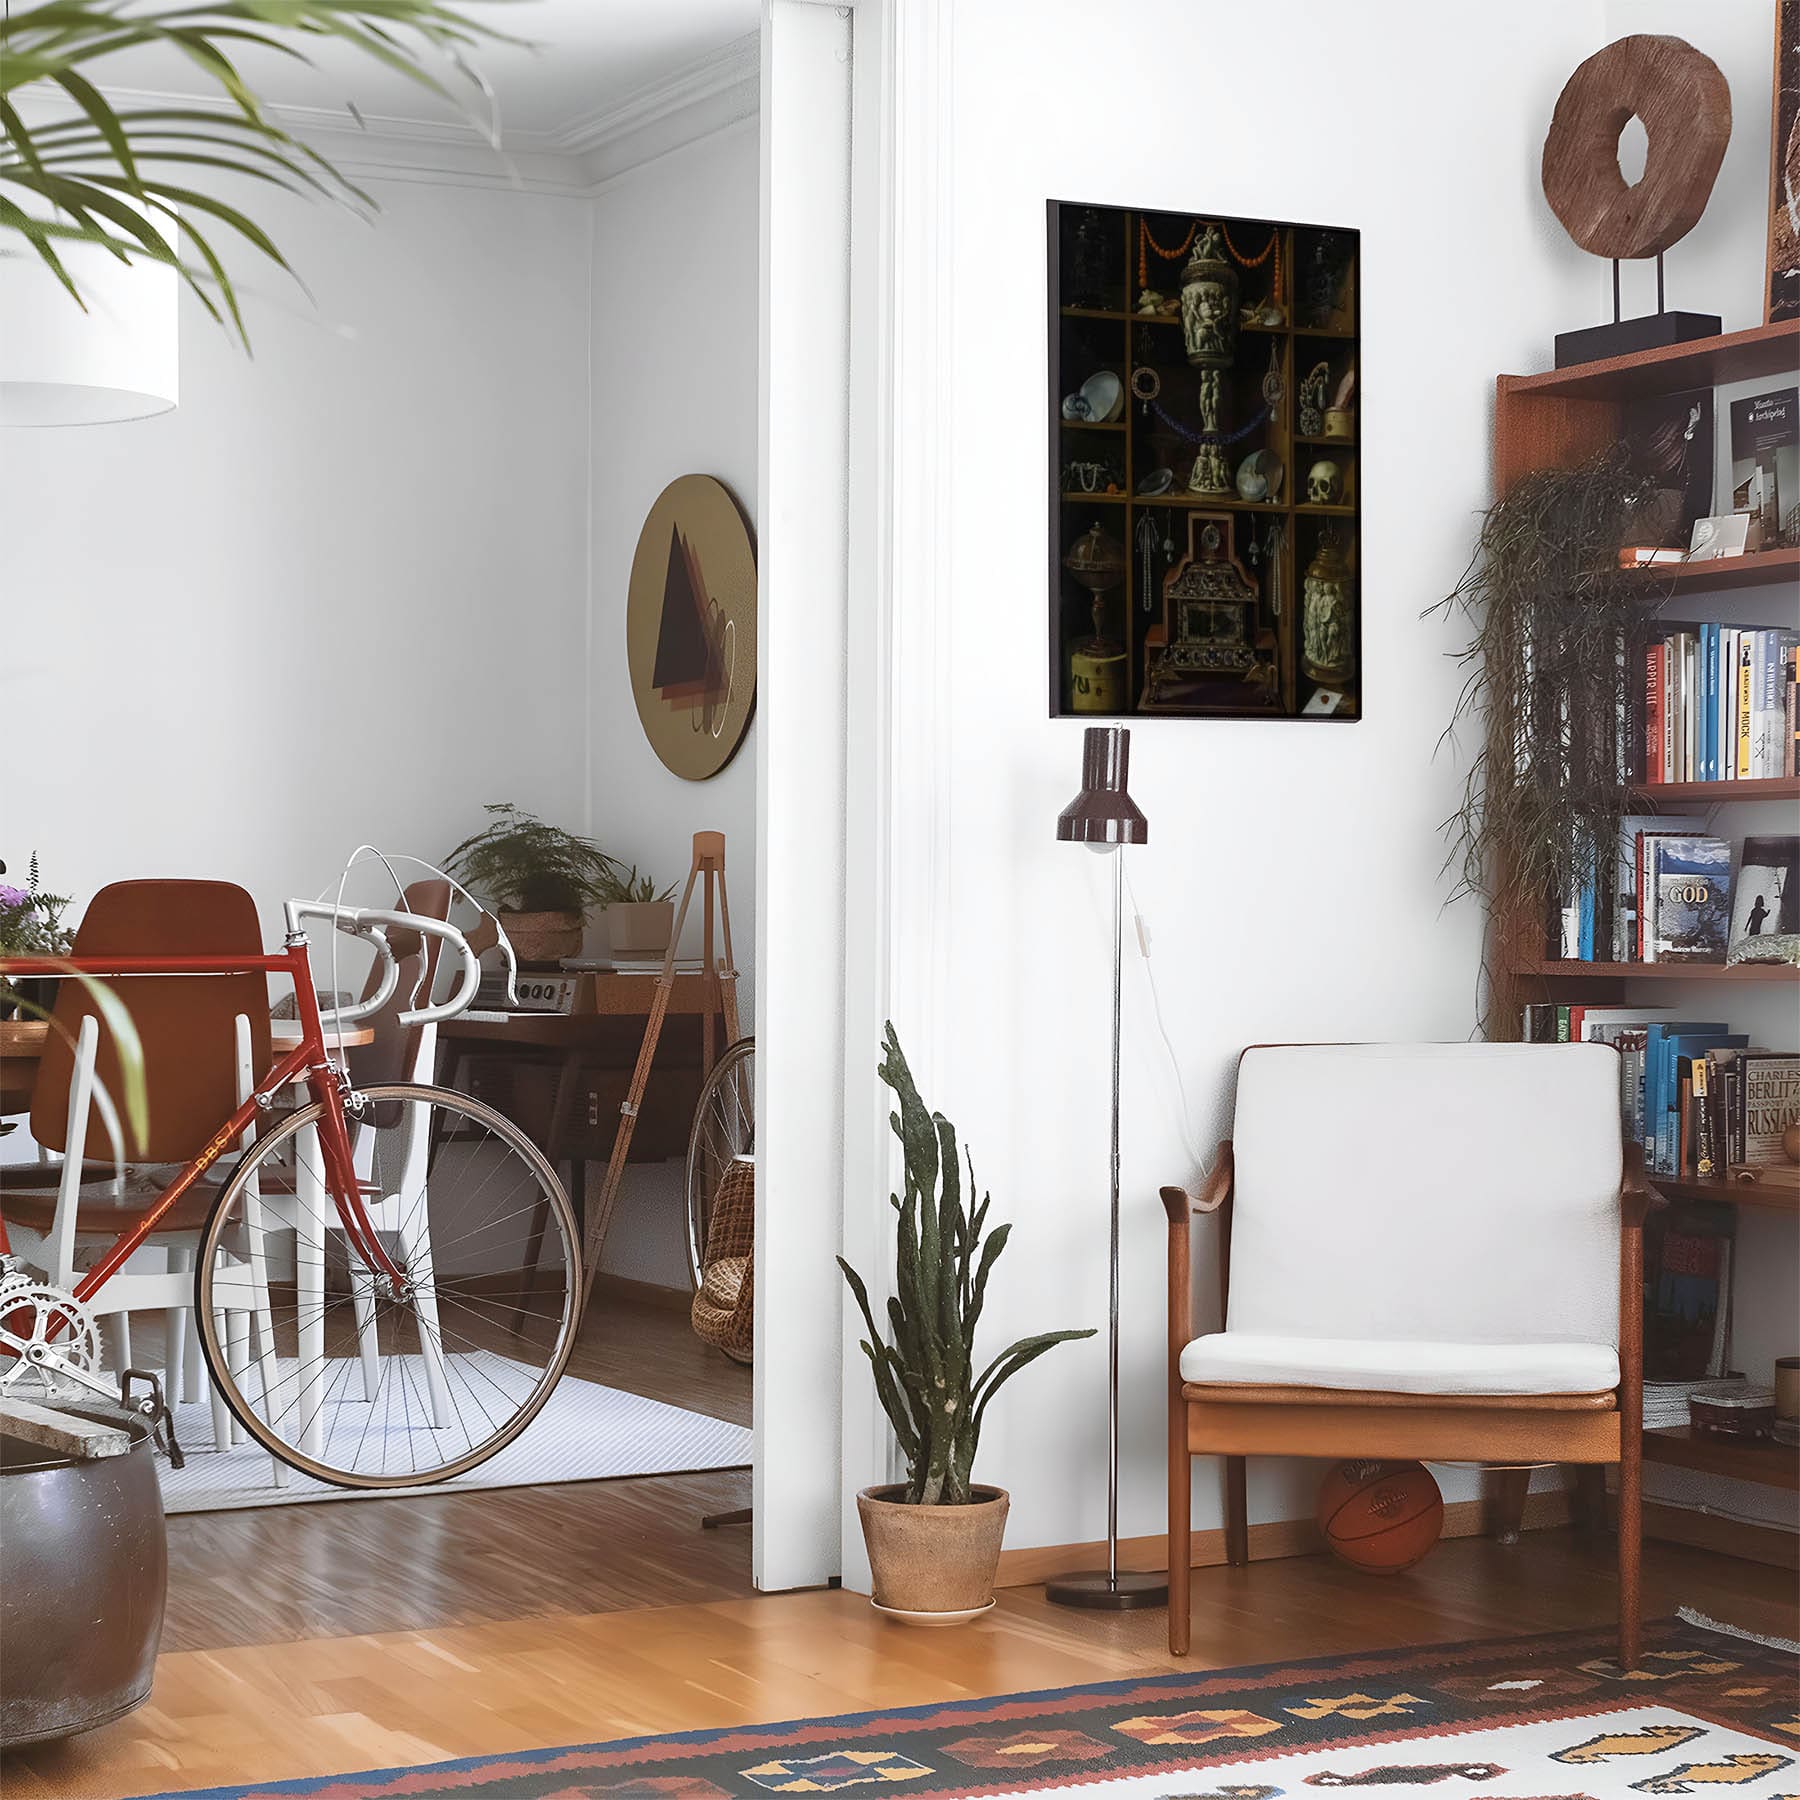 Eclectic living room with a road bike, bookshelf and house plants that features framed artwork of a Vintage Treasure Chest above a chair and lamp